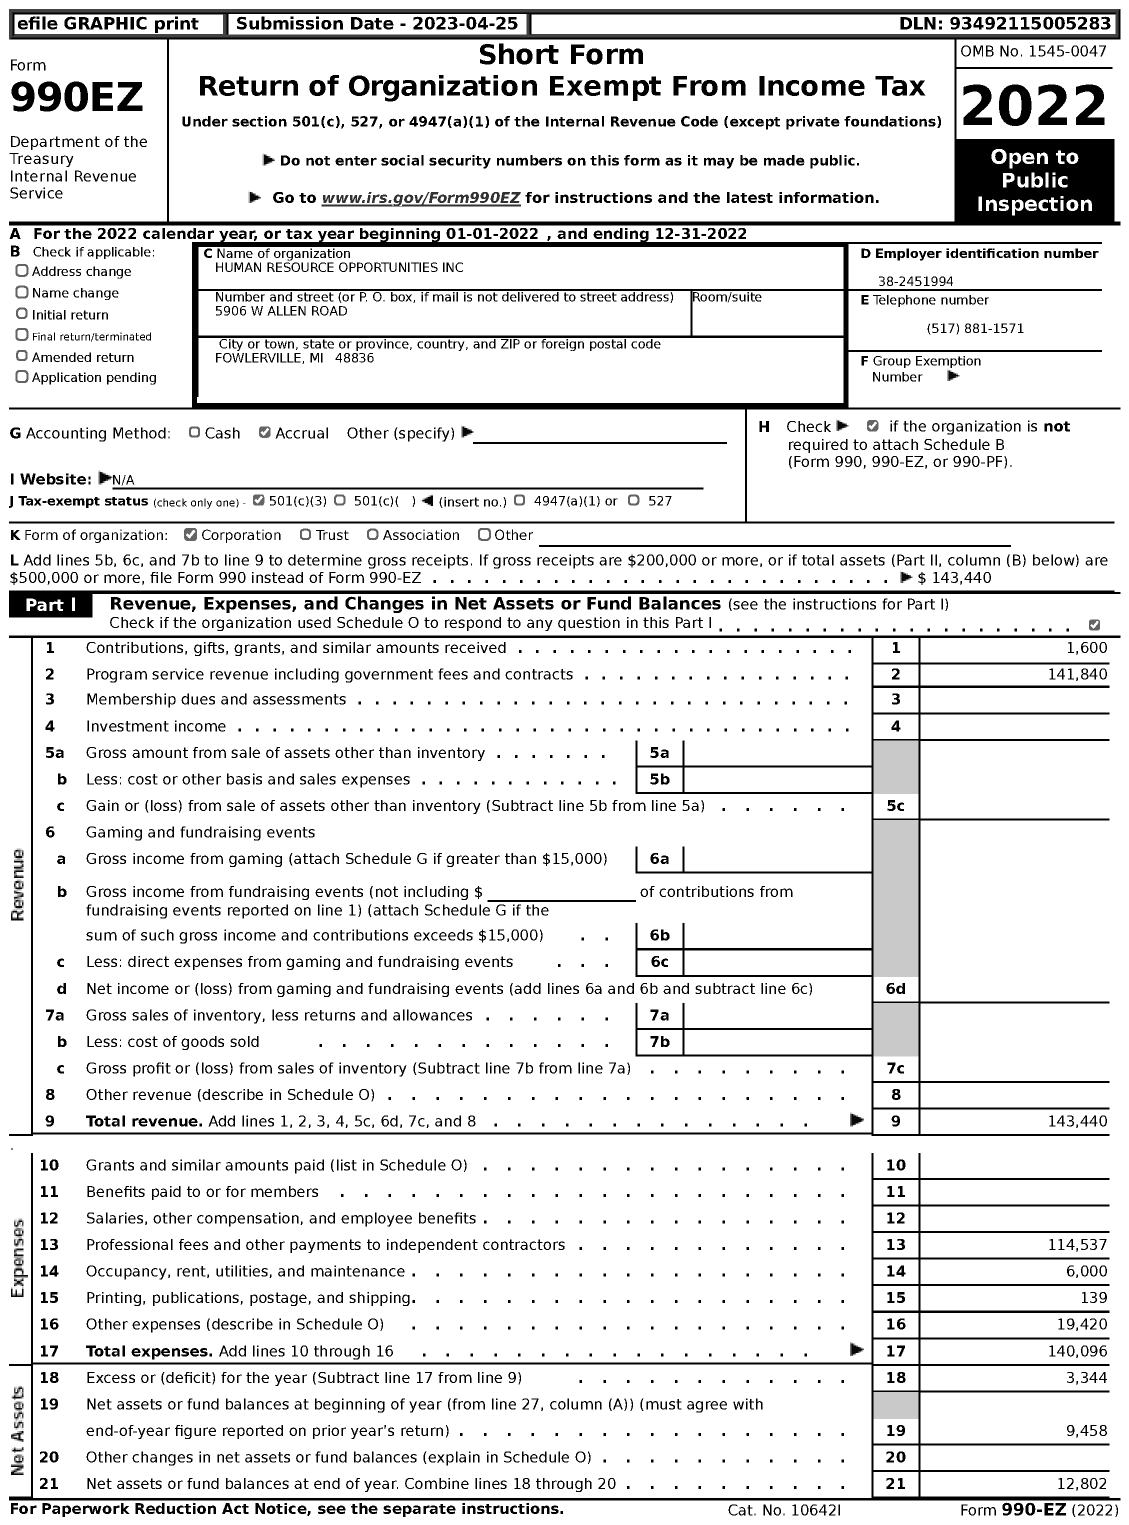 Image of first page of 2022 Form 990EZ for Human Resource Opportunities